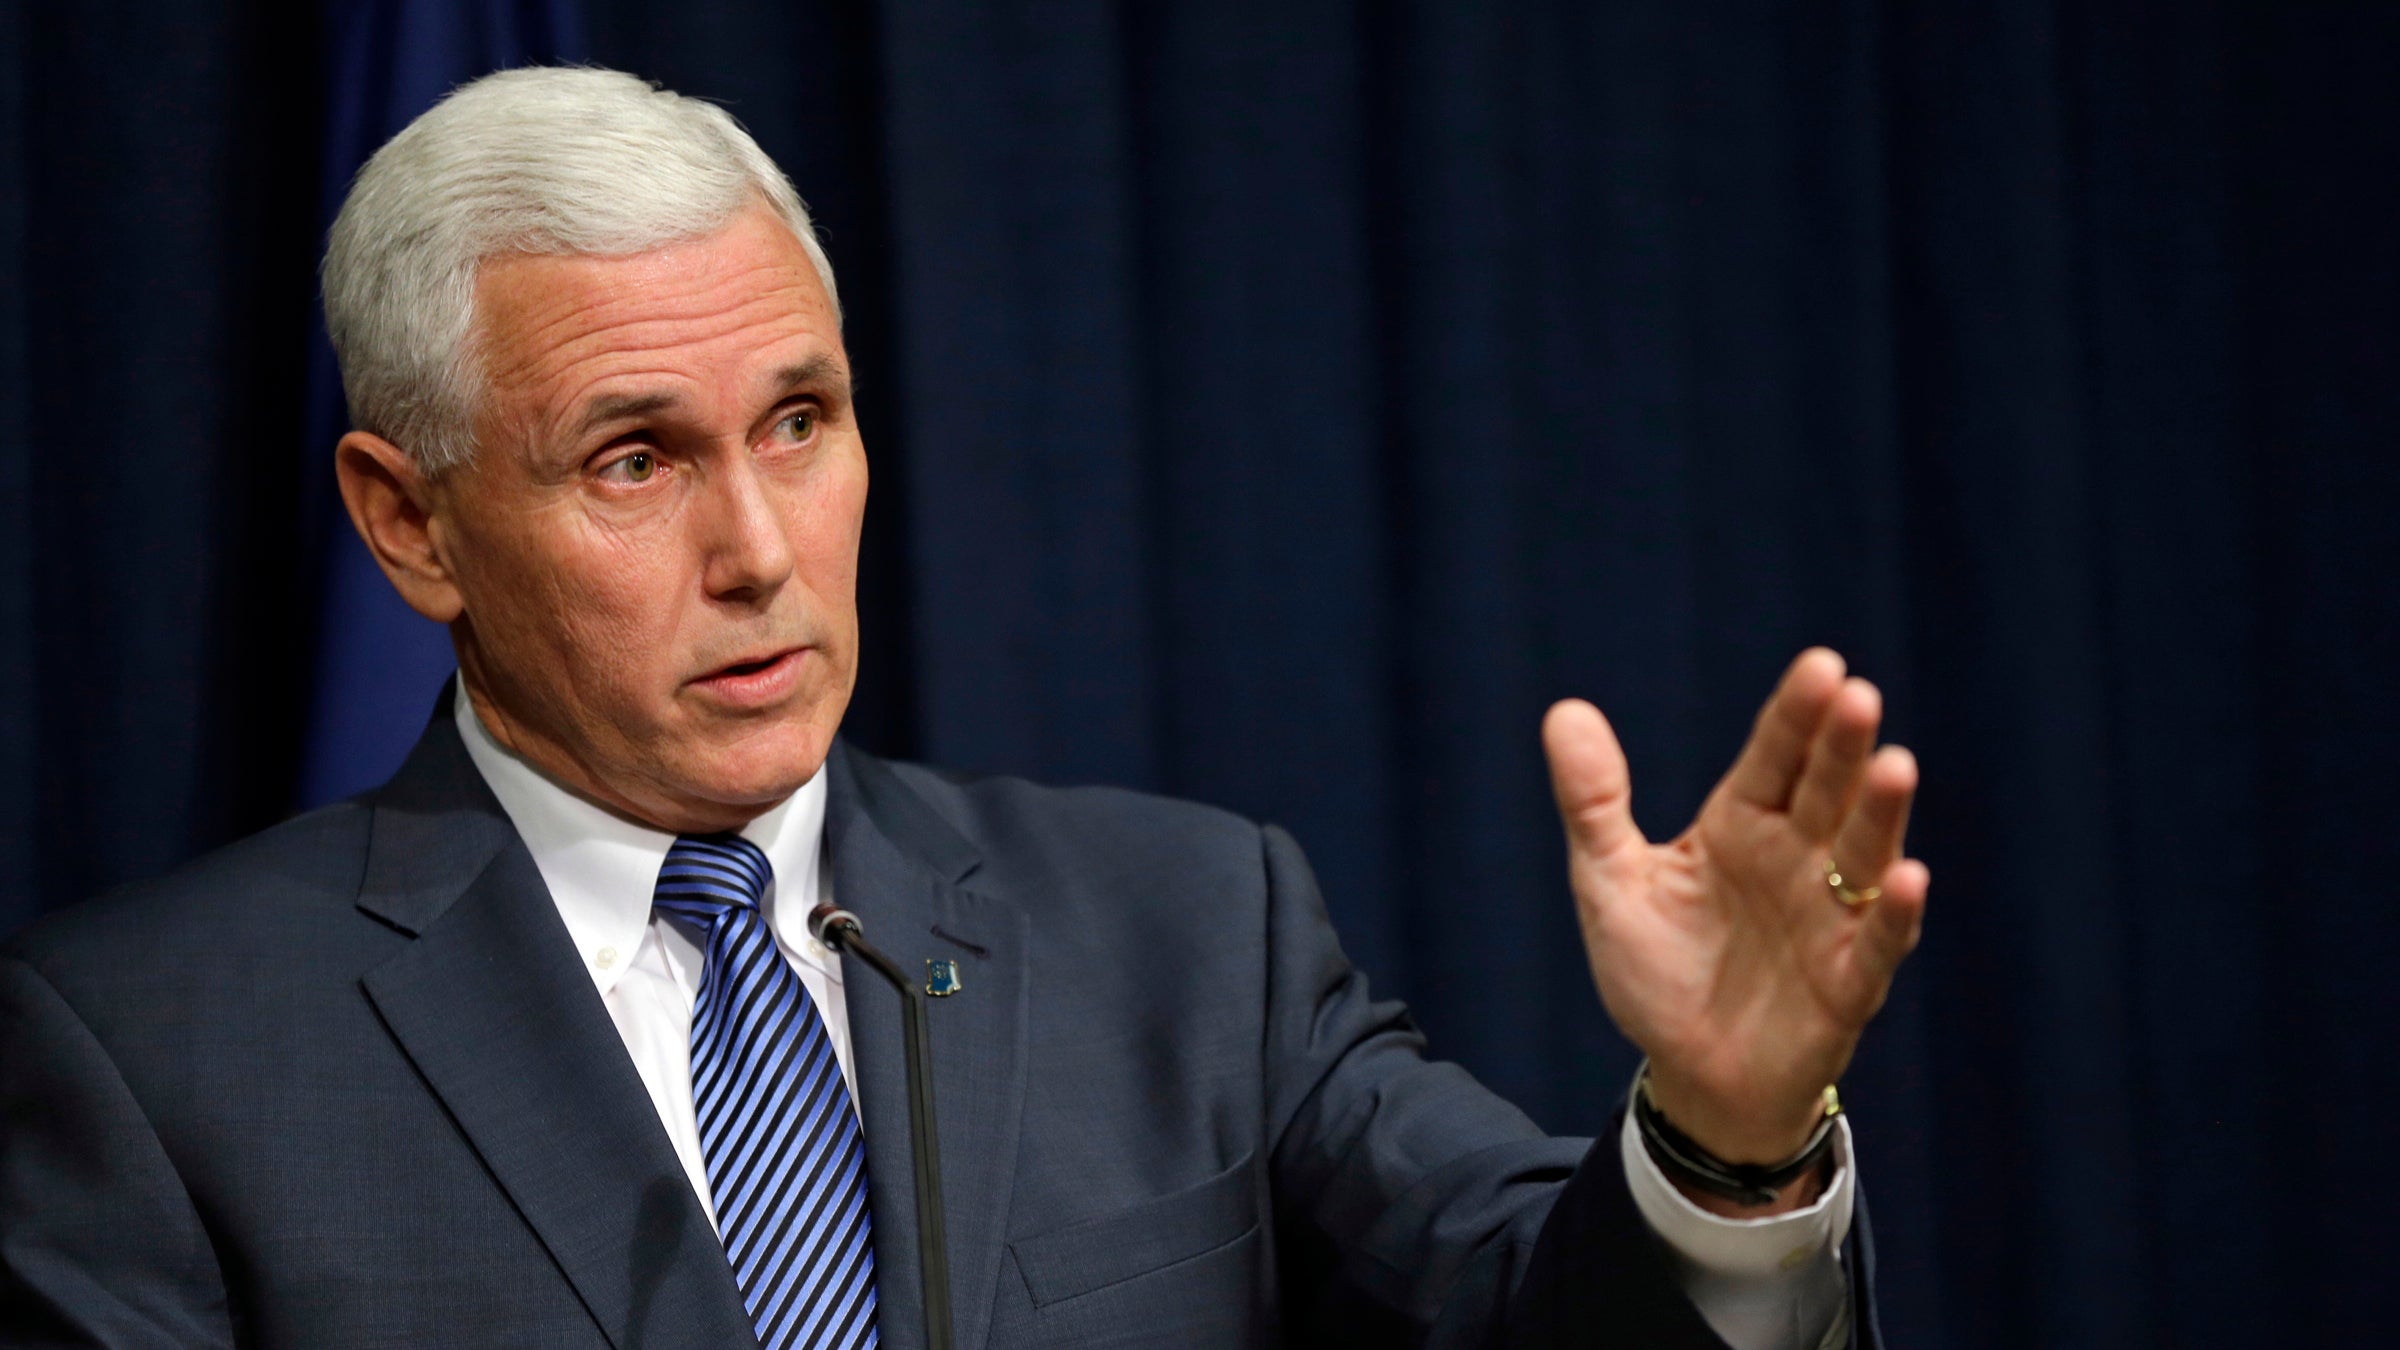  Indiana Gov. Mike Pence holds a news conference at the Statehouse in Indianapolis, Thursday, March 26, 2015.  Pence has signed into law a religious objections bill that some convention organizers and business leaders have opposed amid concern it could allow discrimination against gay people. (AP Photo/Michael Conroy) 